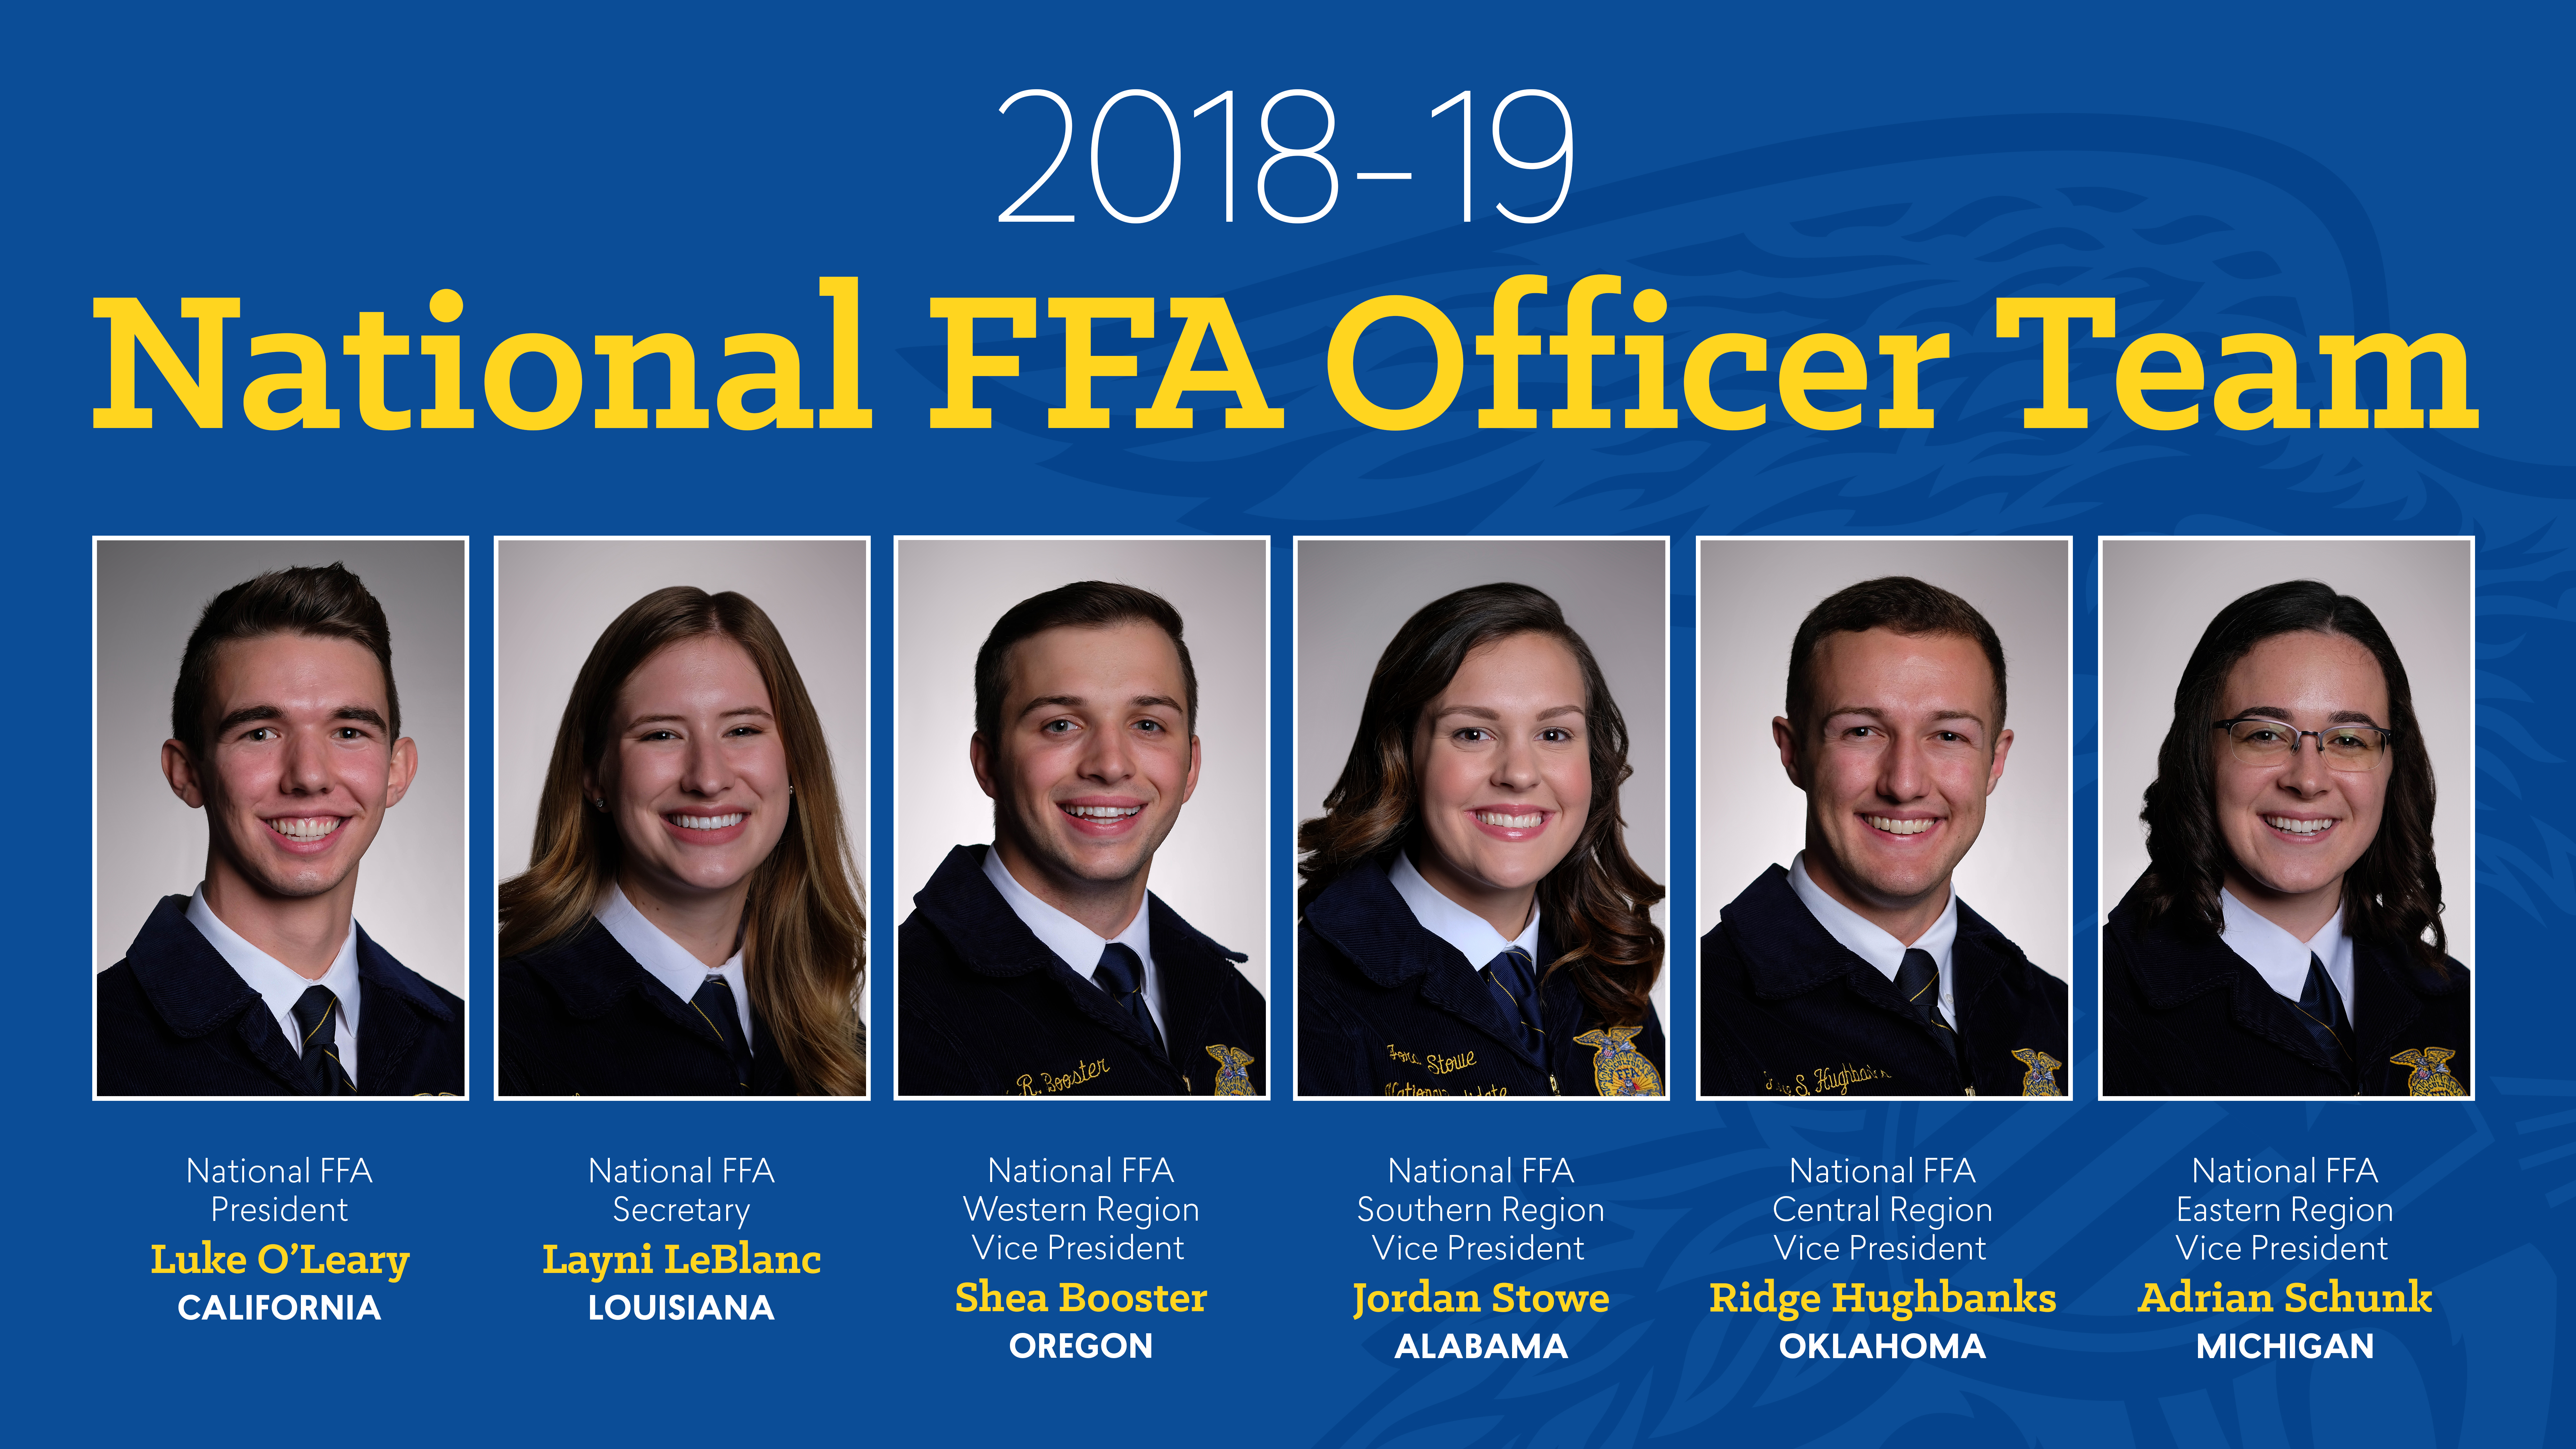 2017-18 National FFA Officer Team Elected at 90th National FFA Convention &  Expo - National FFA Organization